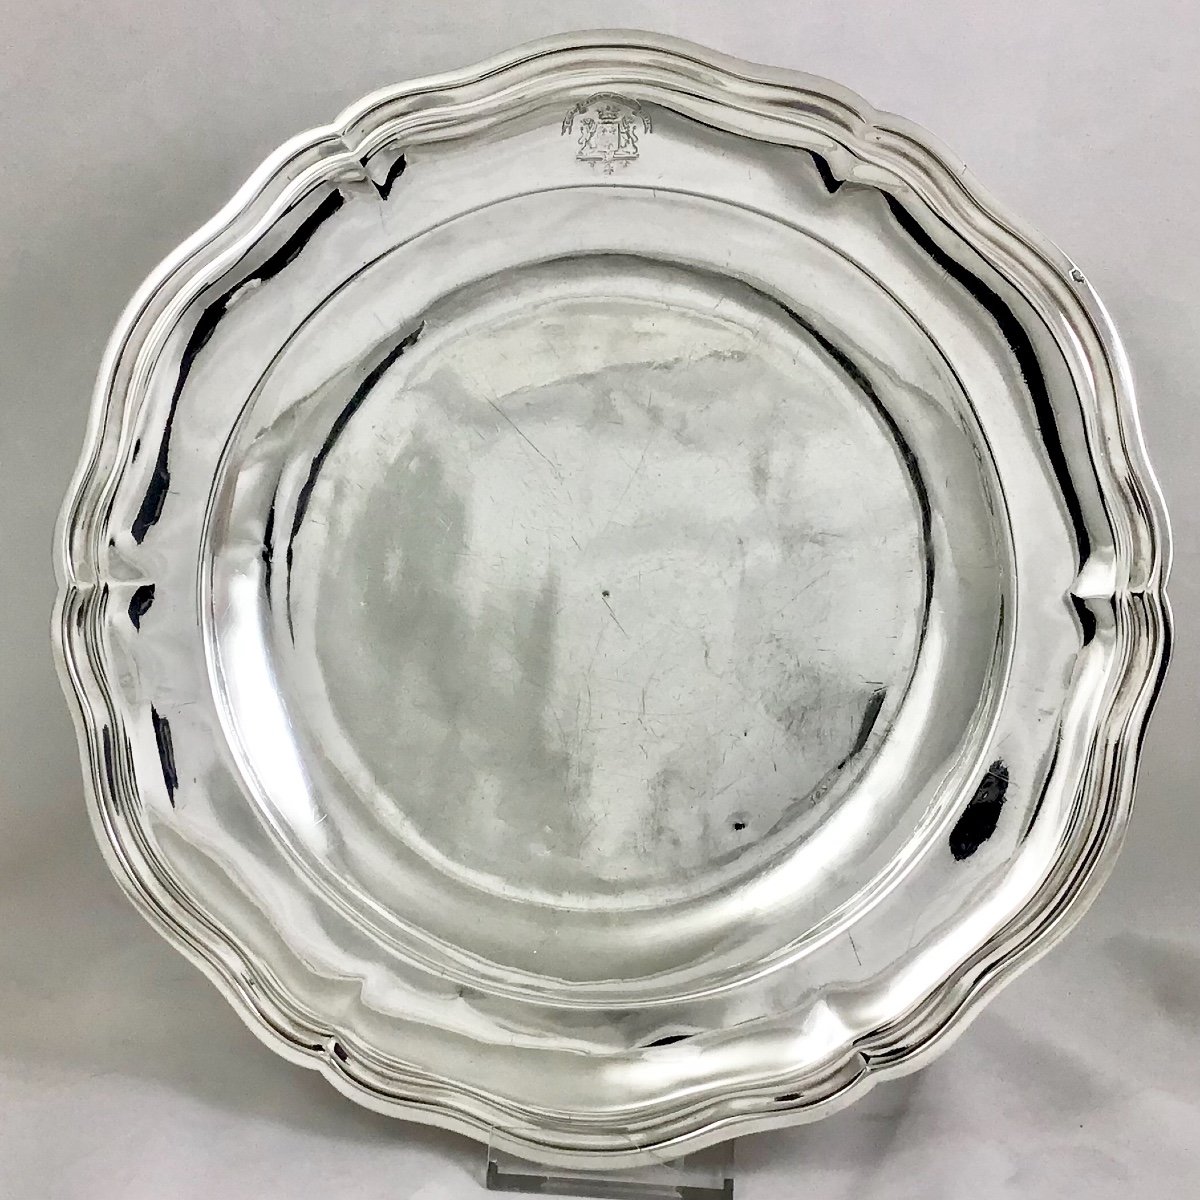 Marquis De Chaponay, Paris 1780, Serving Dish In Sterling Silver-photo-3